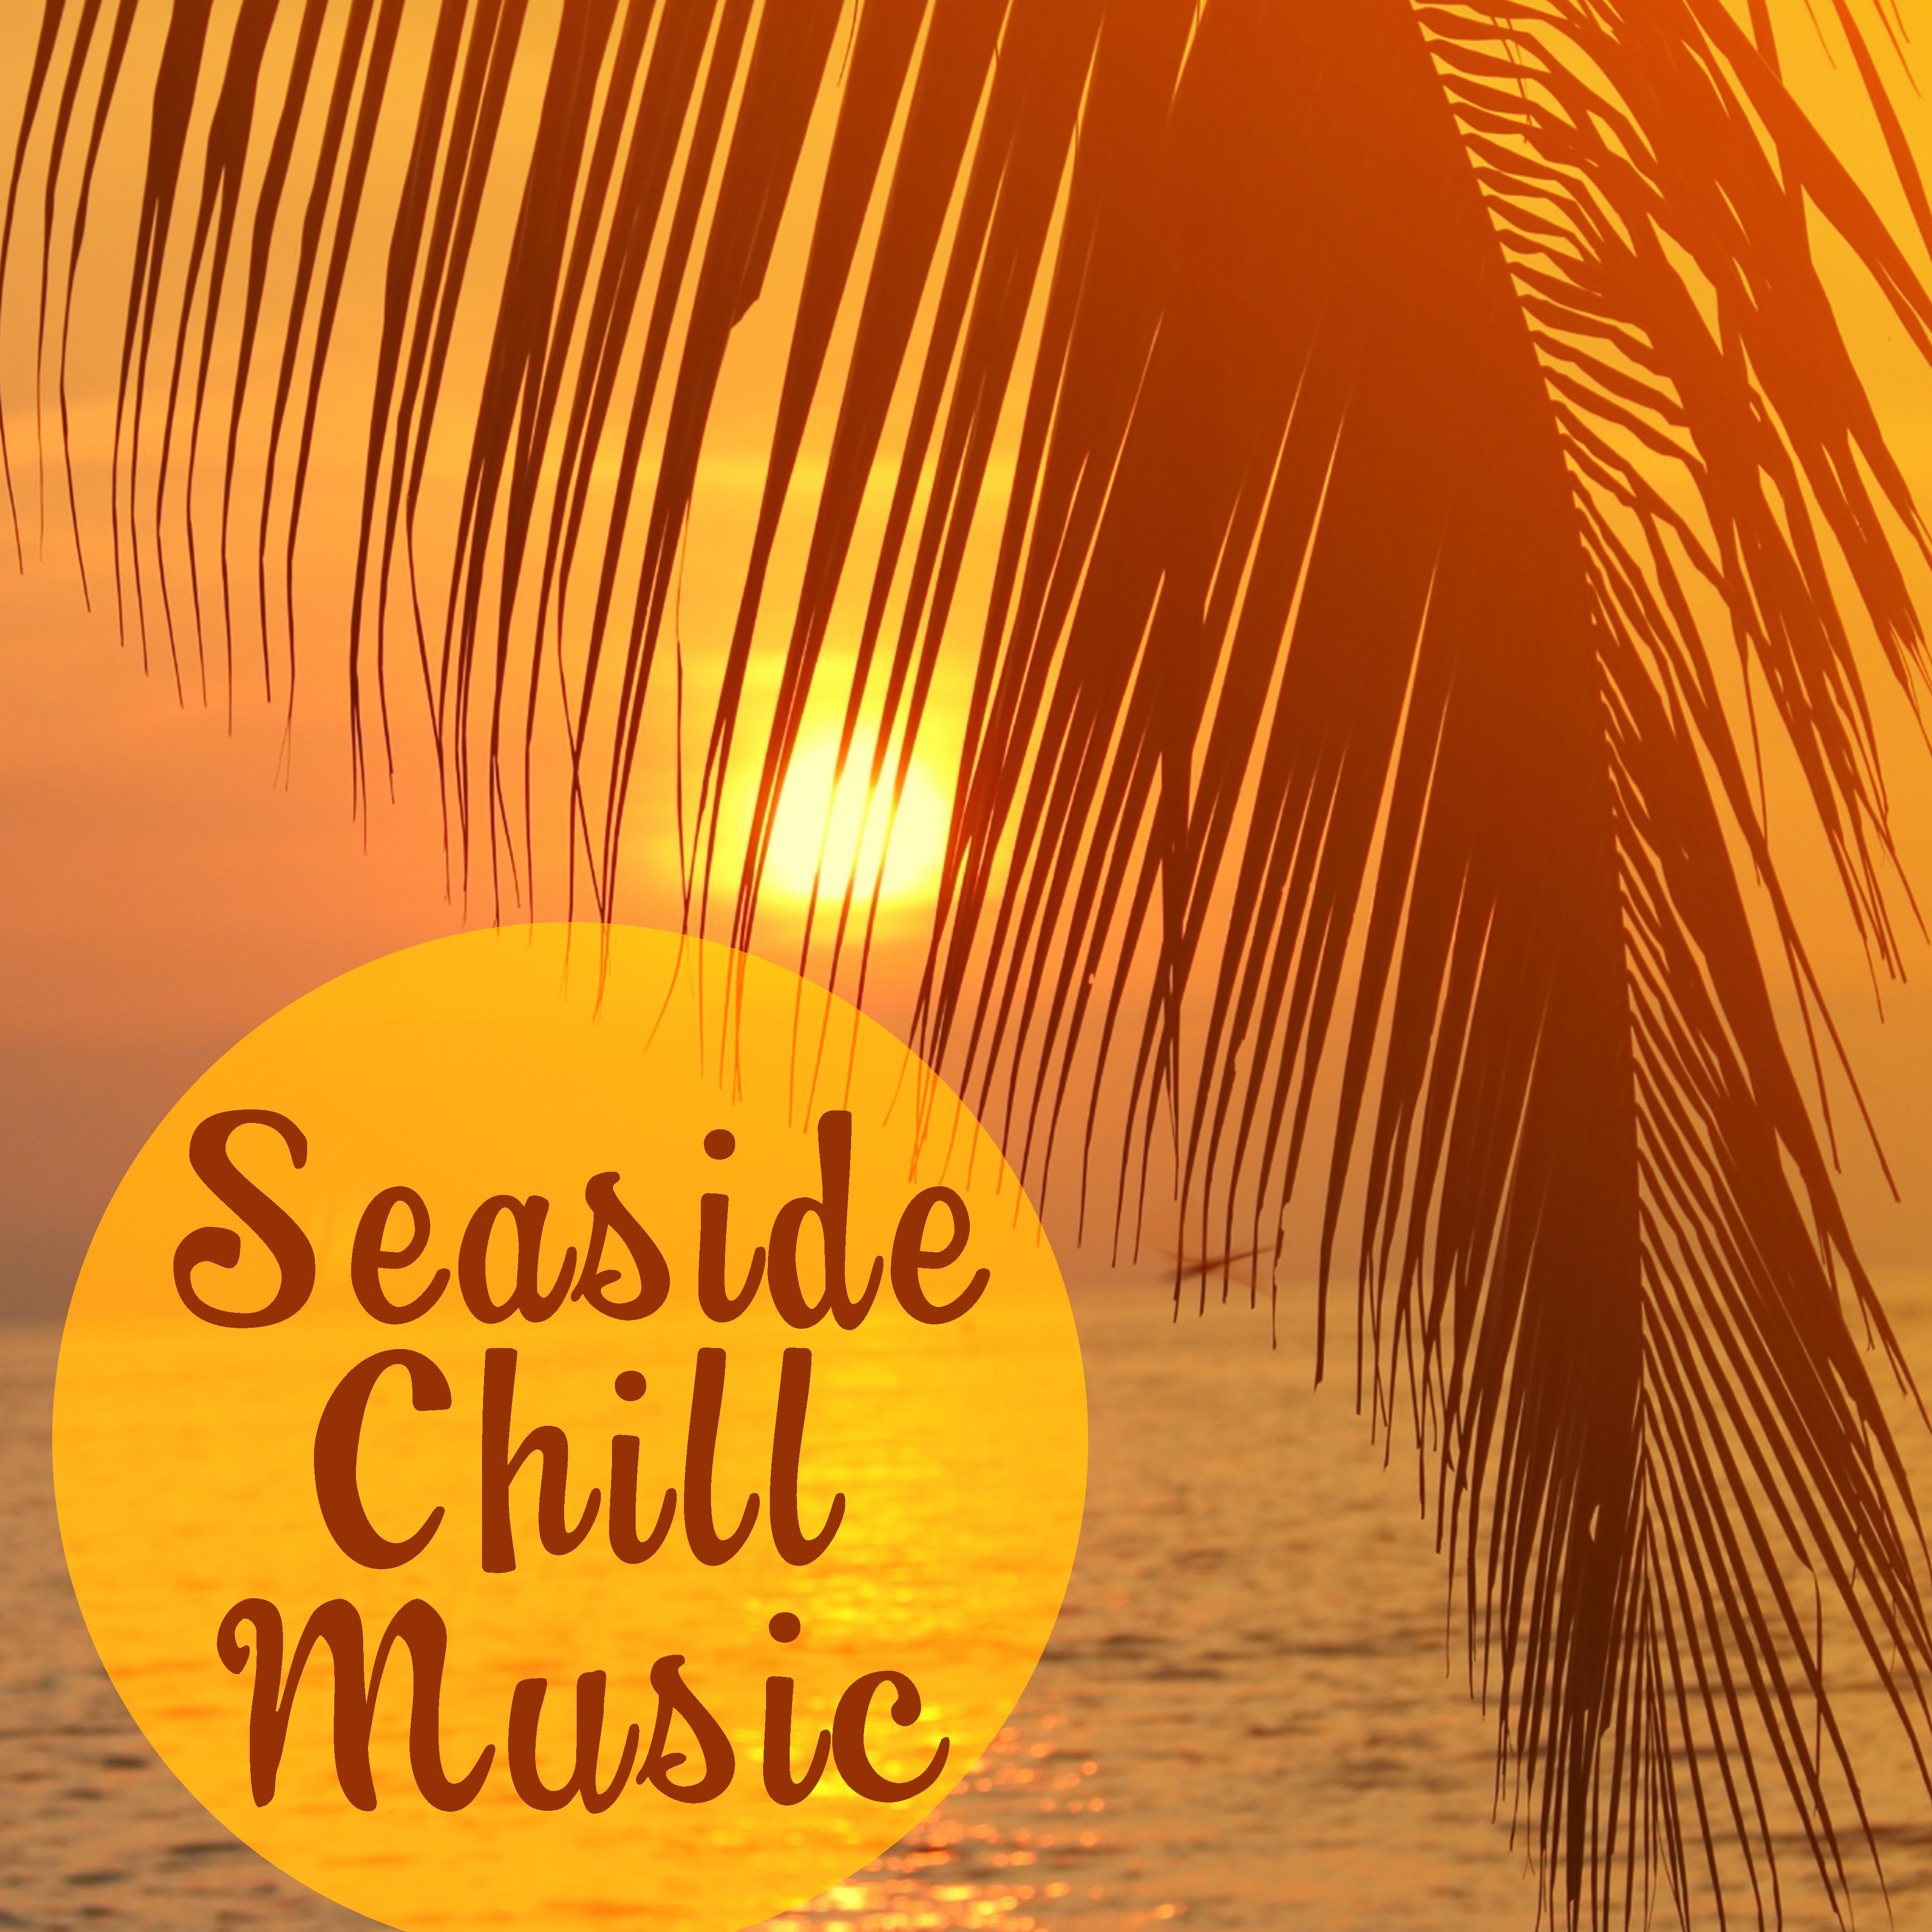 Seaside Chill Music – Calming Sounds to Relax, Easy Listening, Music for Mind Peace, Beautiful Sounds & Views